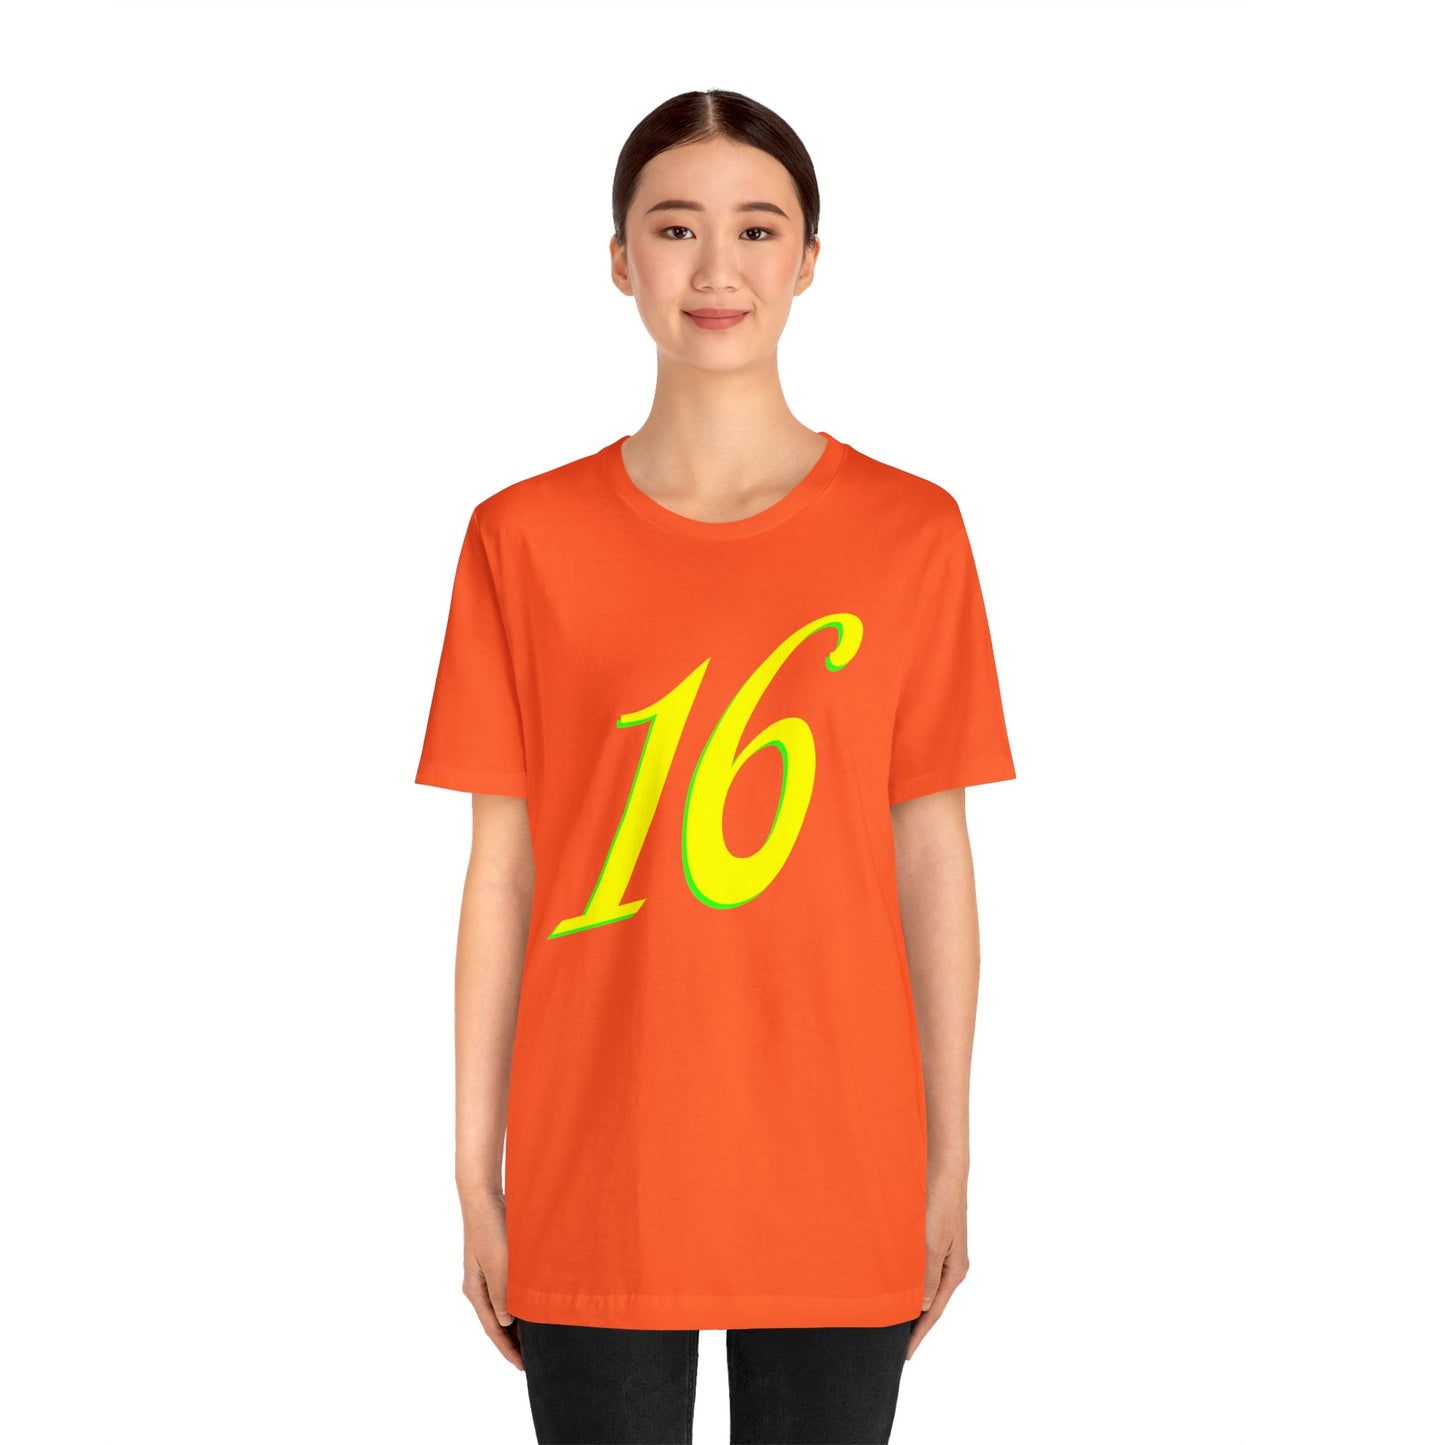 Number 16 Design - Soft Cotton Tee for birthdays and celebrations, Gift for friends and family, Multiple Options by clothezy.com in Asphalt Size Medium - Buy Now